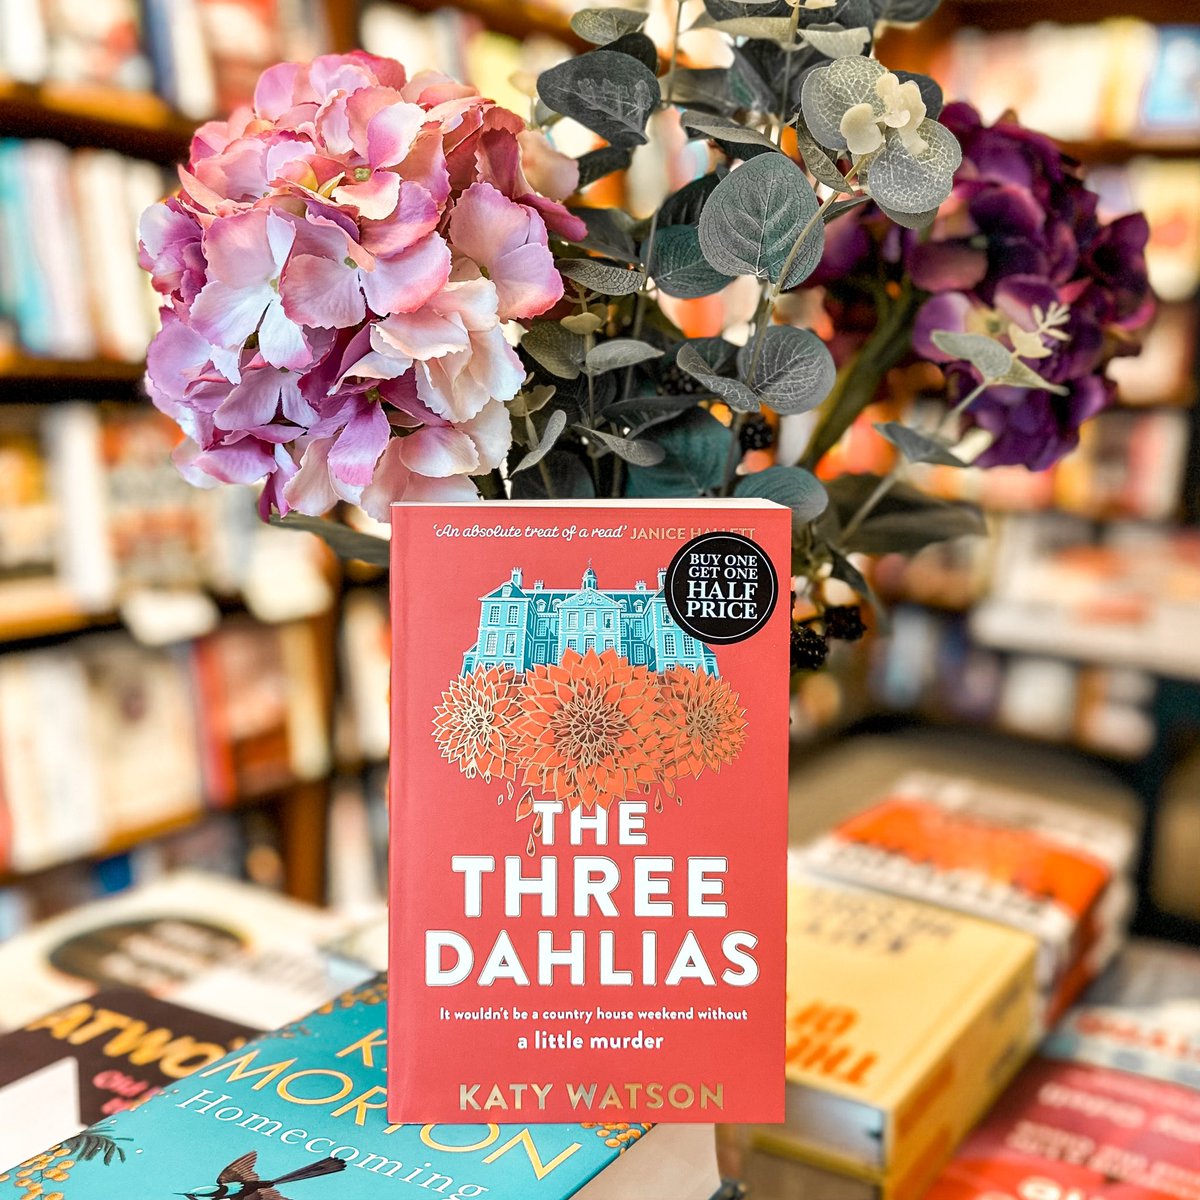 A trio of actresses famous for portraying Golden Age sleuth Dahlia Lively must join forces to unmask a killer in our new thriller of the month, The Three Dahlias! 🌼

#waterstonesnorthallerton #northallerton #lovenorthallerton #waterstones #thethreedahlias